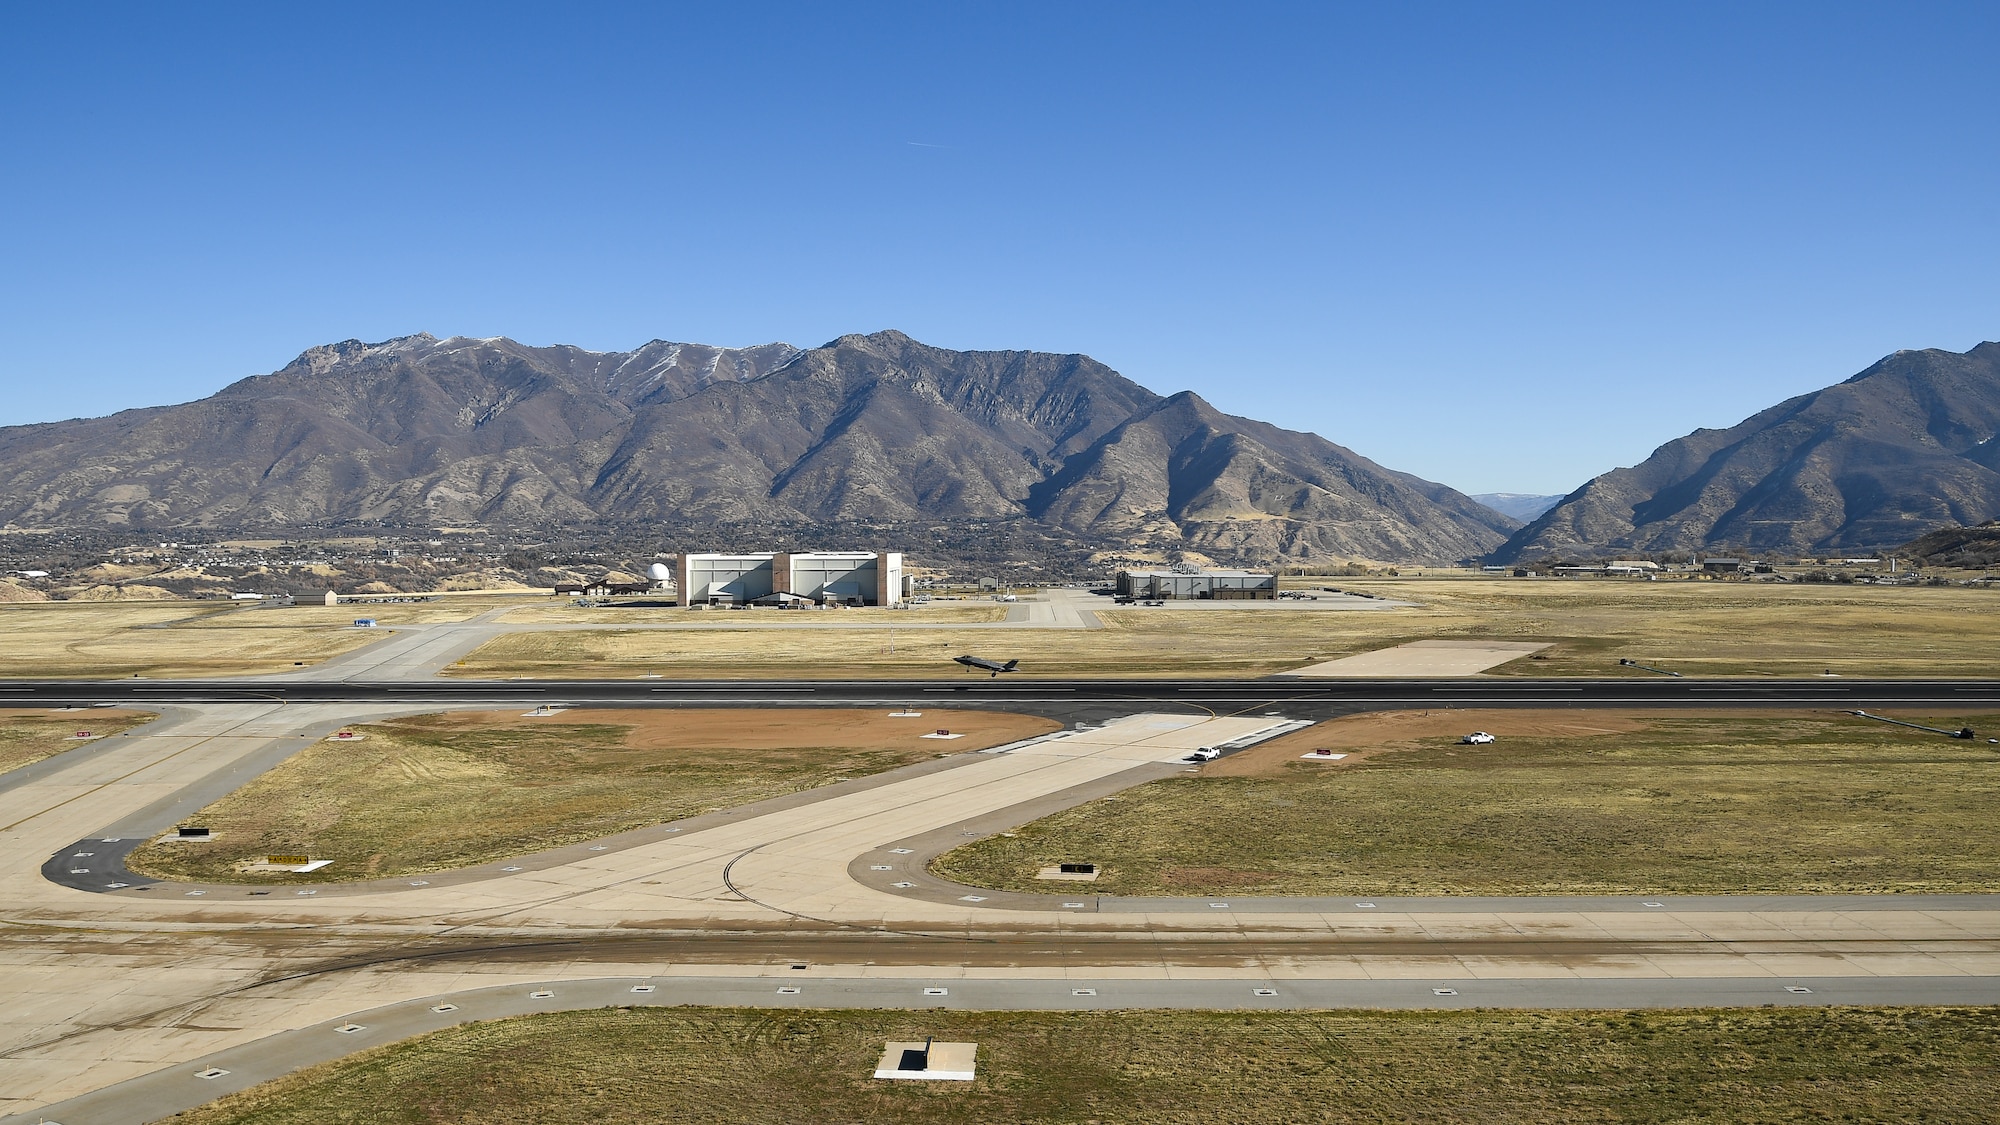 An F-35A Lightning II takes off from the base's newly resurfaced runway Nov. 5, 2019, at Hill Air Force Base, Utah. A nine month, $44.6 million construction project providing major repairs to the runway was completed this month. In addition to complete asphalt rehabilitation, the 13,500-foot runway received wider shoulders, a widened taxiway on the south end, new overruns, new airfield signs, and new electrical wiring and new airfield lighting. (U.S. Air Force photo by R. Nial Bradshaw)